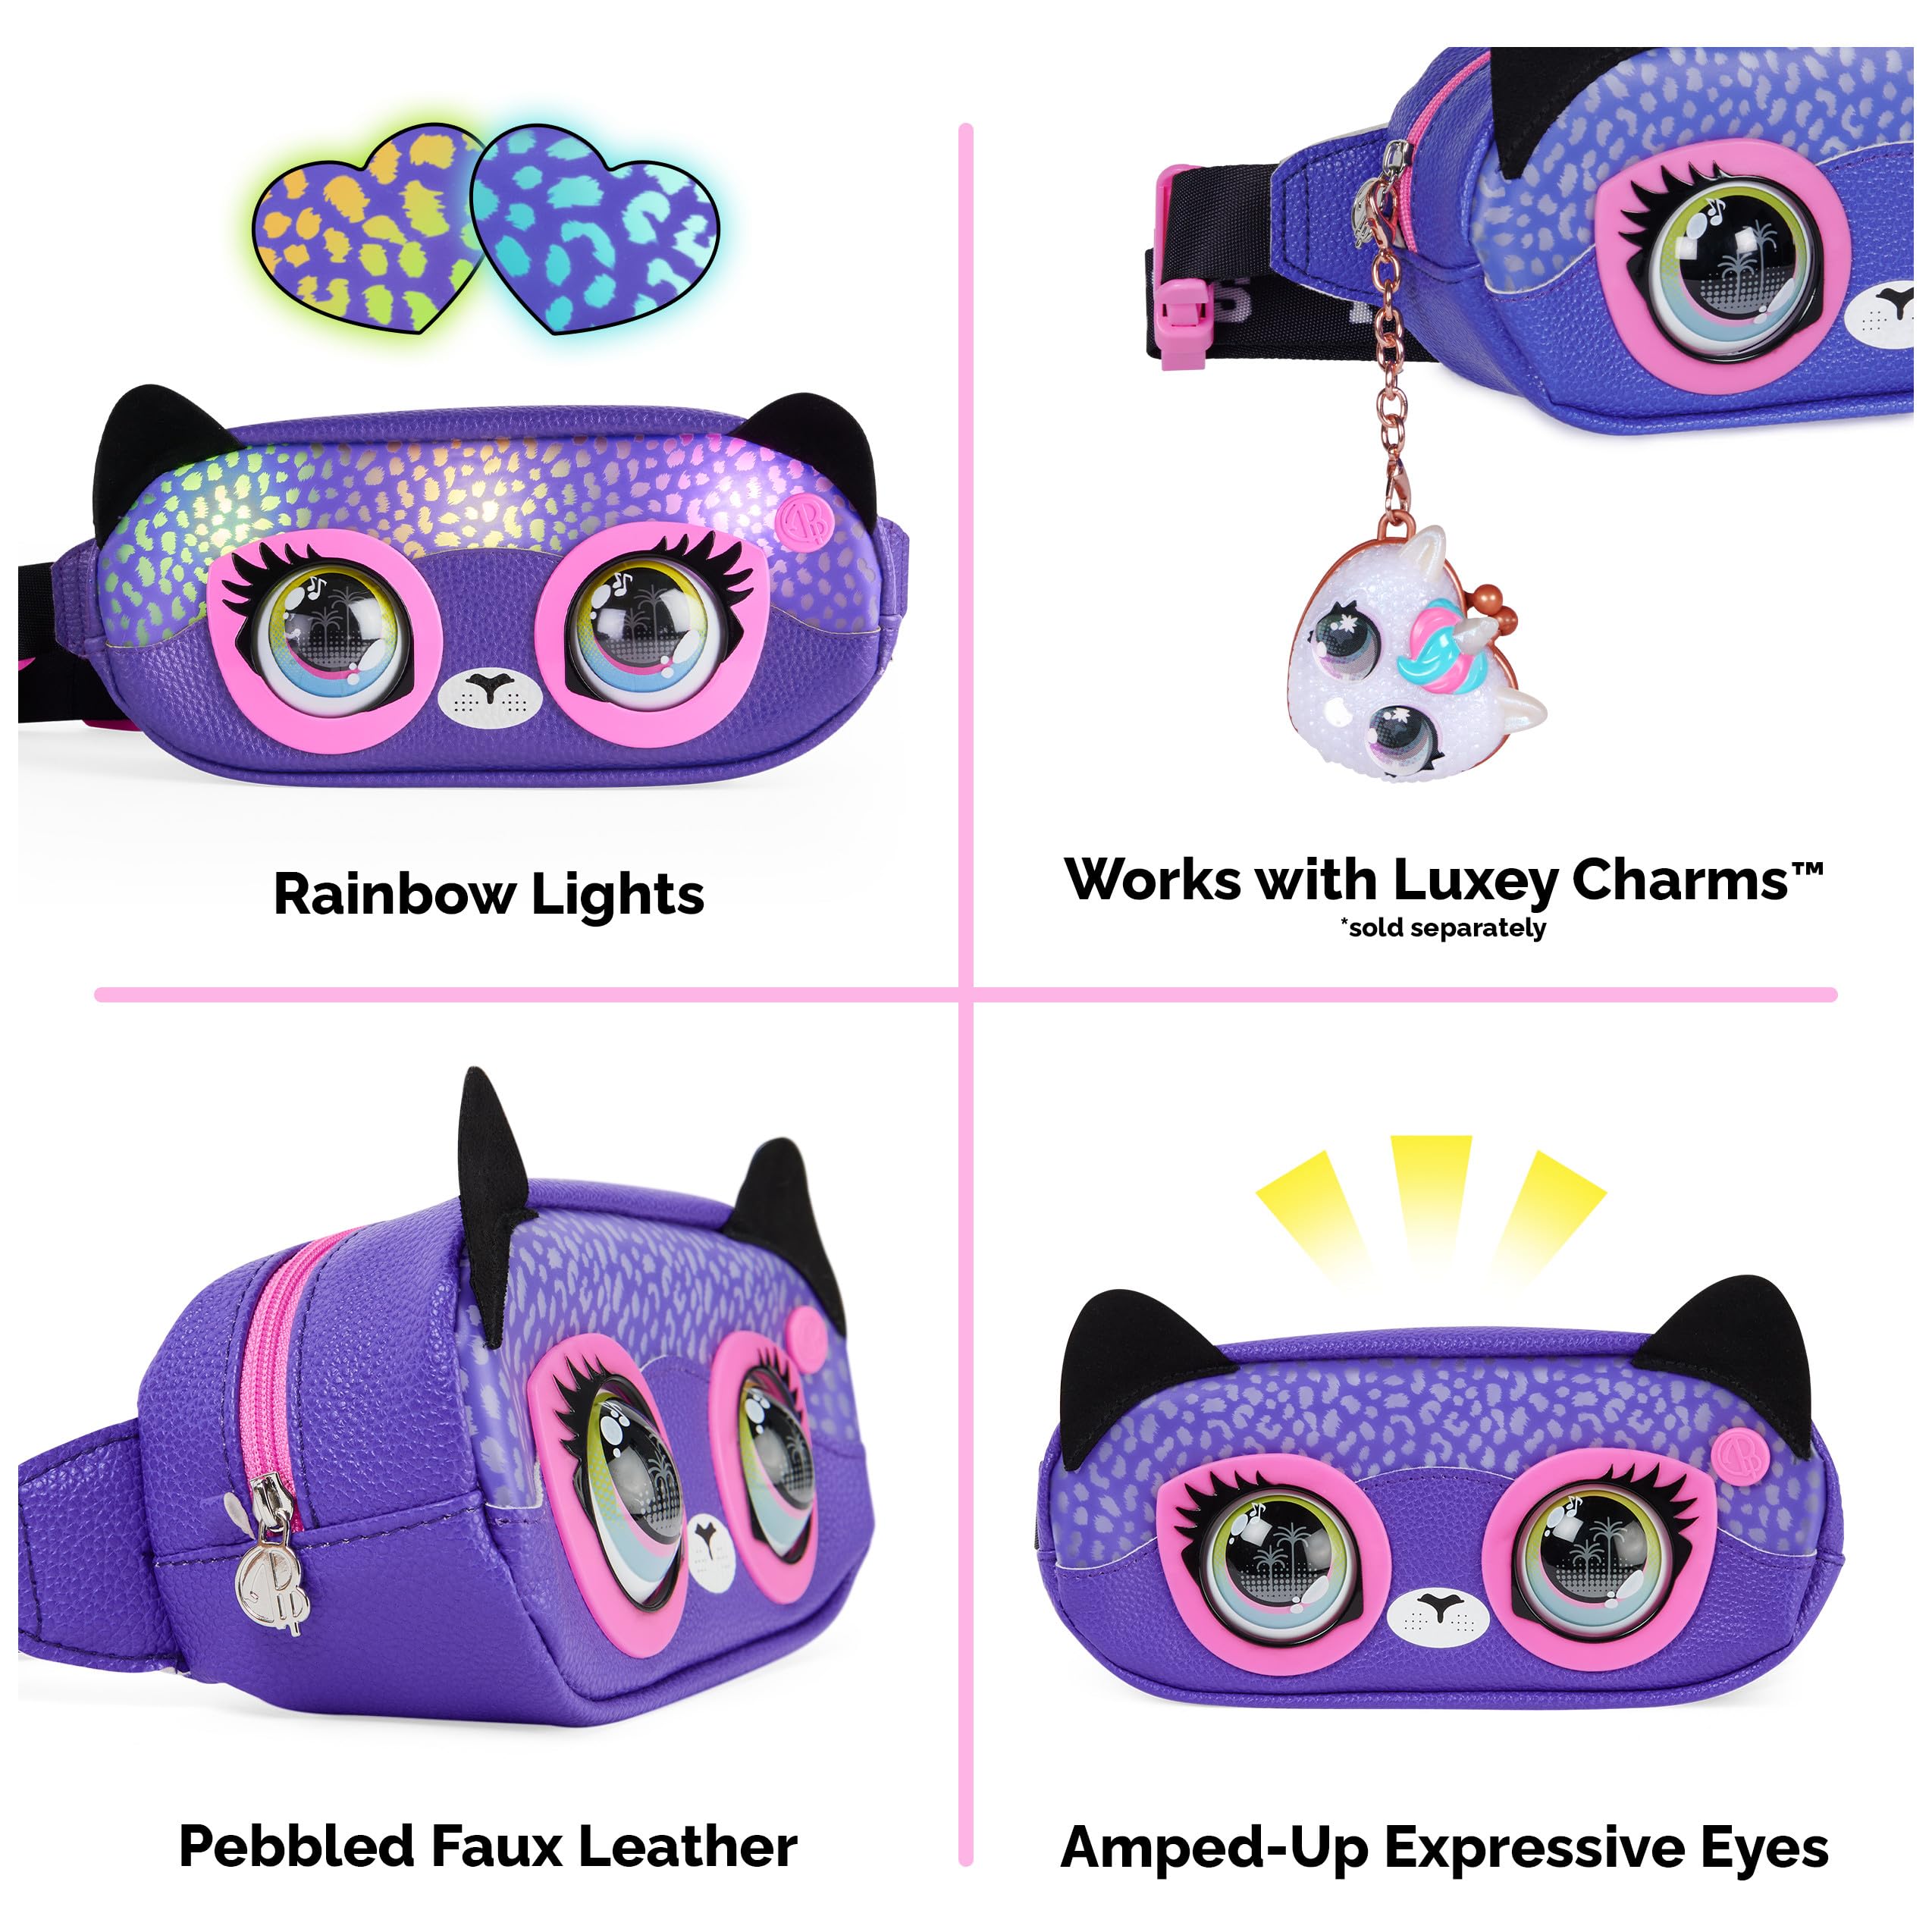 Purse Pets - Cheetah Fanny Pack - Interactive Companion Belt Bag - Interactive Animal with 30 Rainbow Reactions & Light Effects - 5 Songs to Discover - Toy for Children Ages 5+